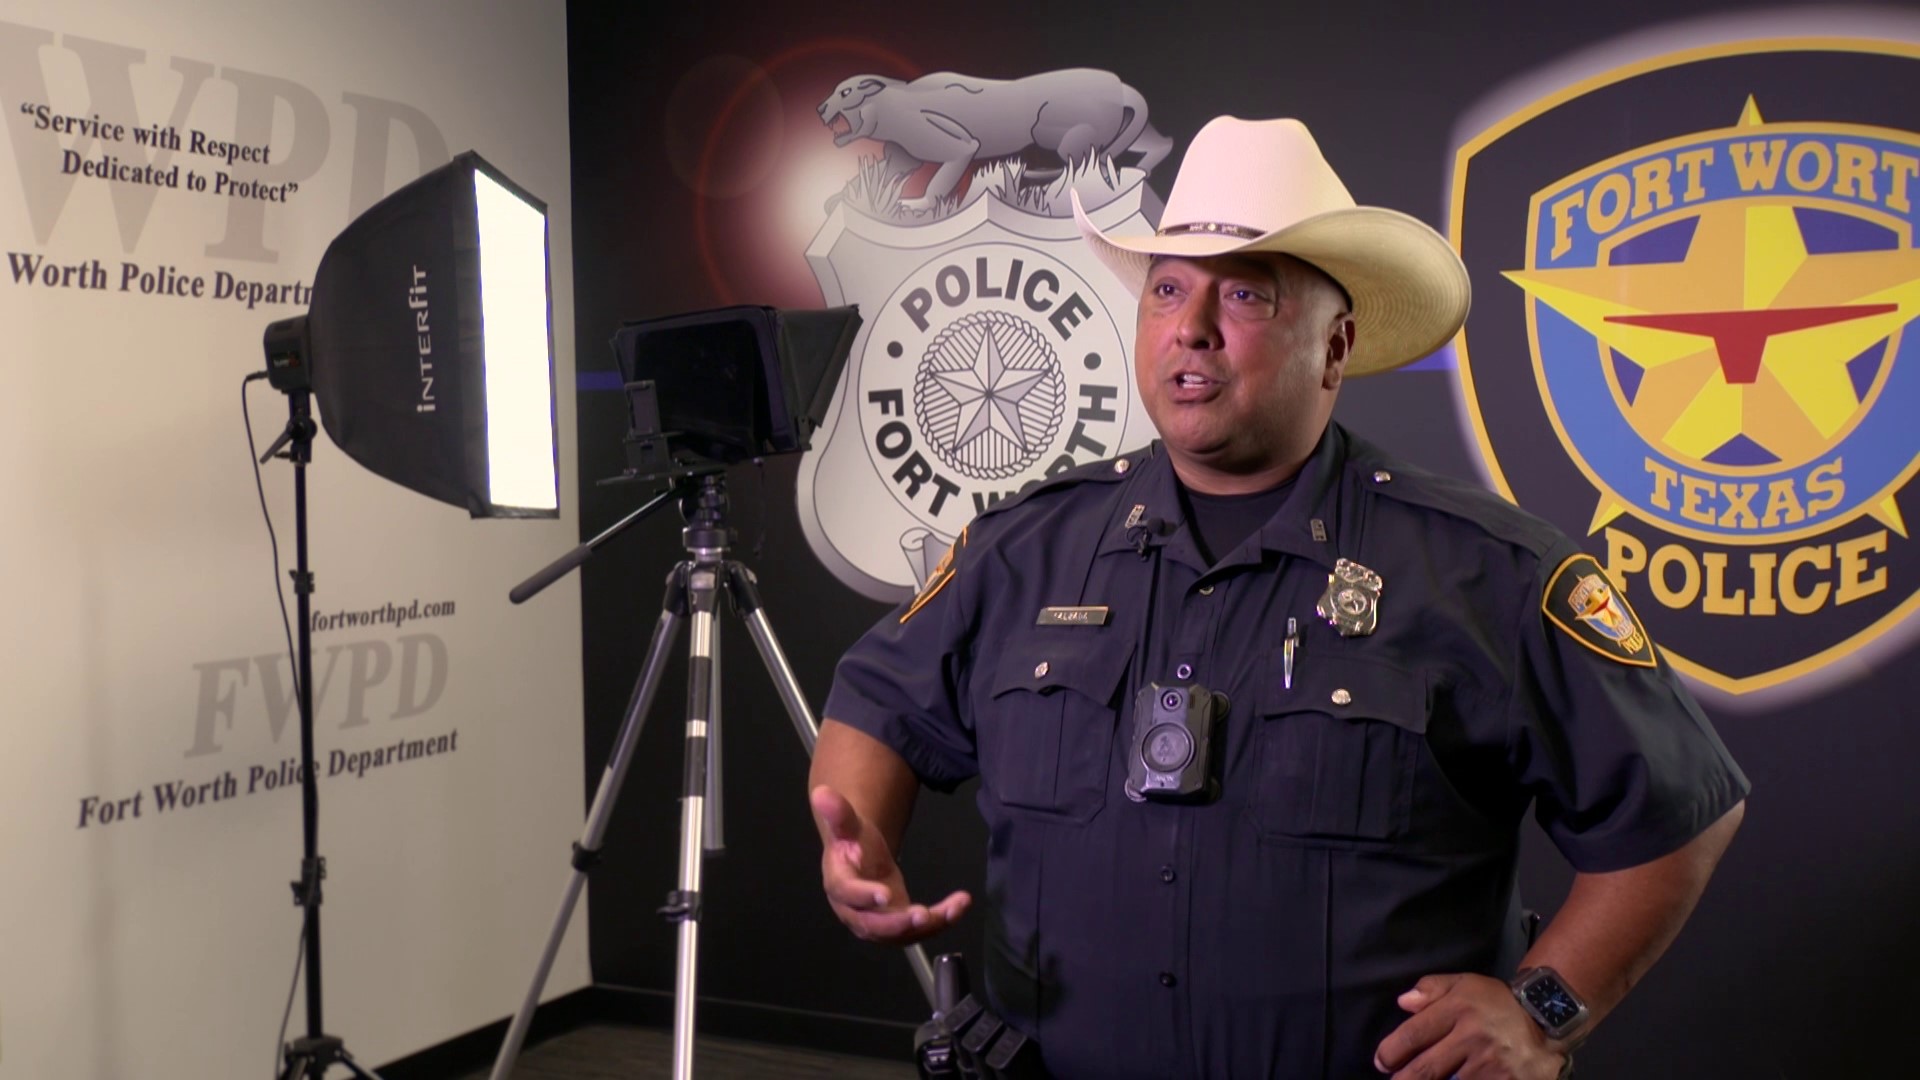 The Fort Worth Police Department hopes the recruitment video can help fill more than 70 new officer positions approved by city council members.